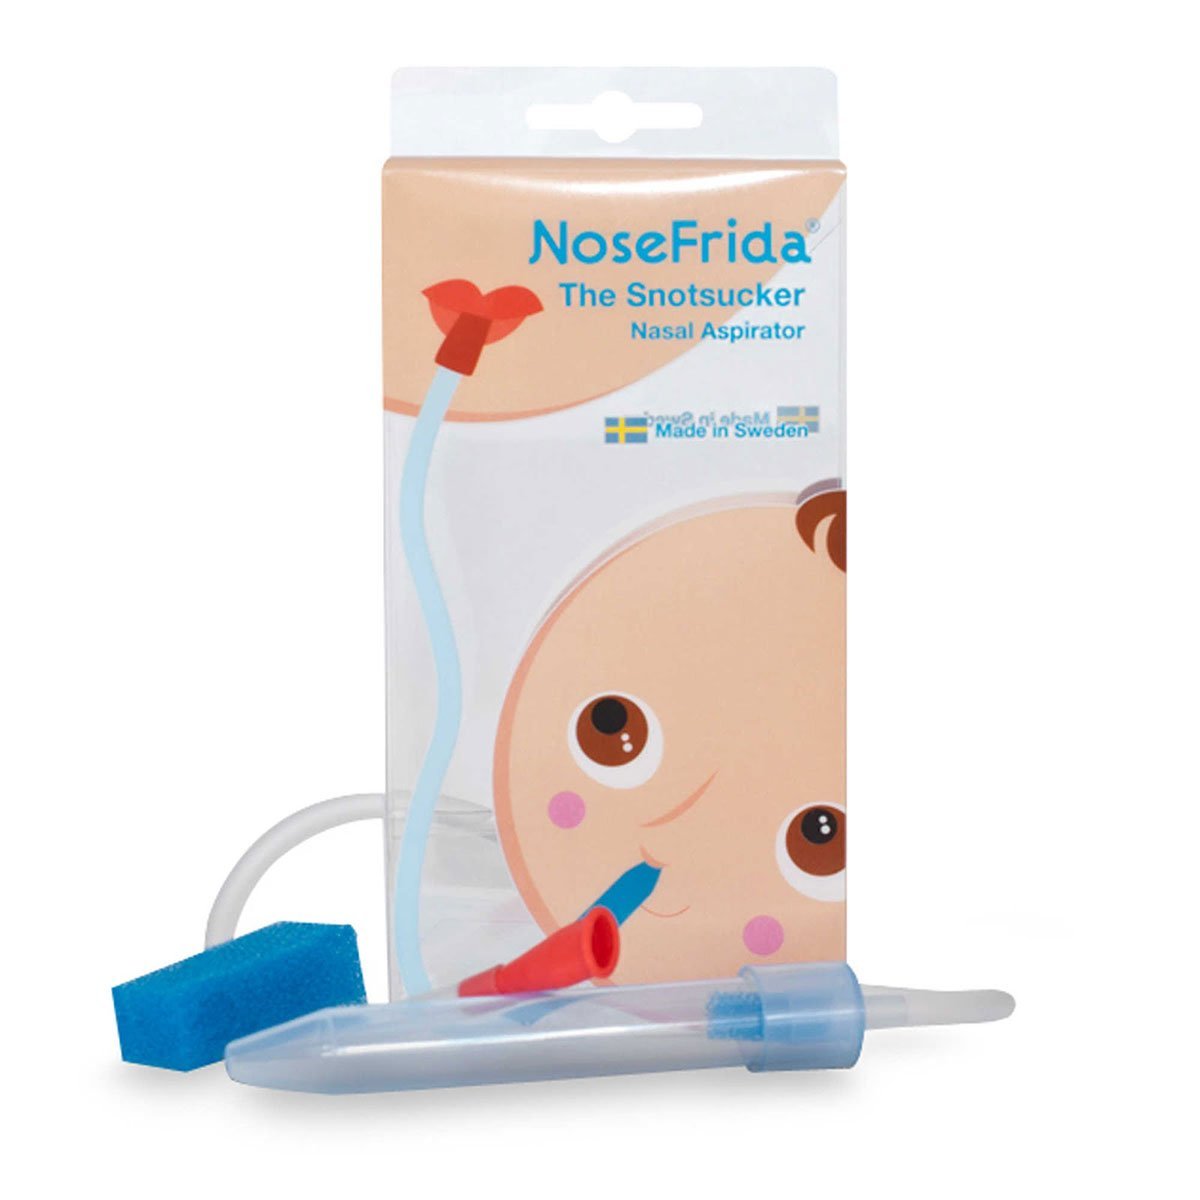 Hygiene Filters Replacements FridaBaby NoseFrida Nose Frida Snot